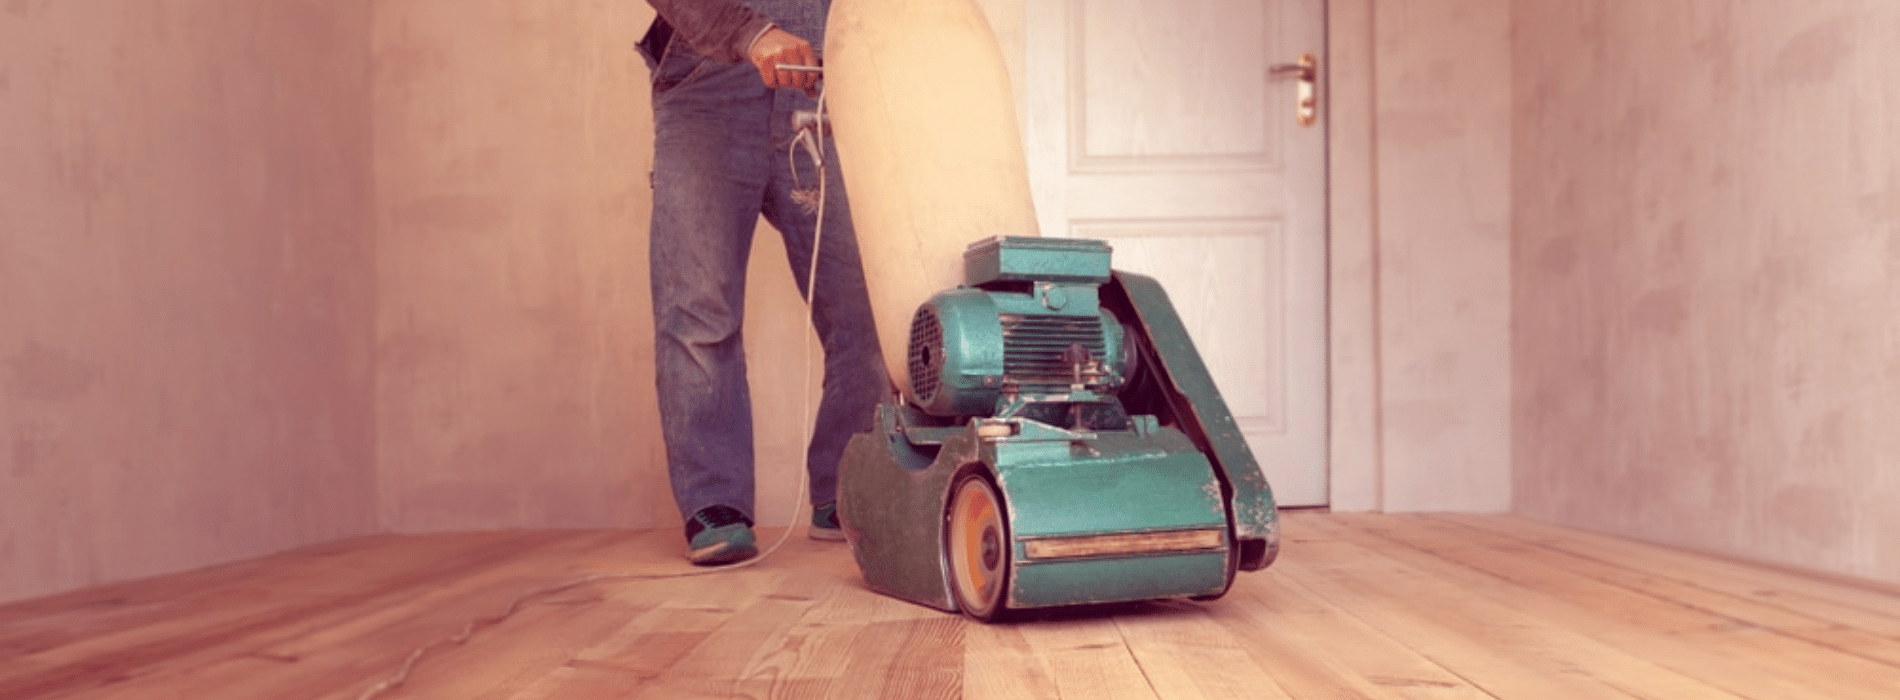 Mr Sander® in Wood Green, N22, expertly sand herringbone floors using a Bona Scorpion drum sander. With a dimension of 200 mm, it delivers a powerful 1.5 kW effect. Operating at 240 V and 50 Hz, it is connected to a dust extraction system with a HEPA filter for a thorough and efficient result. 